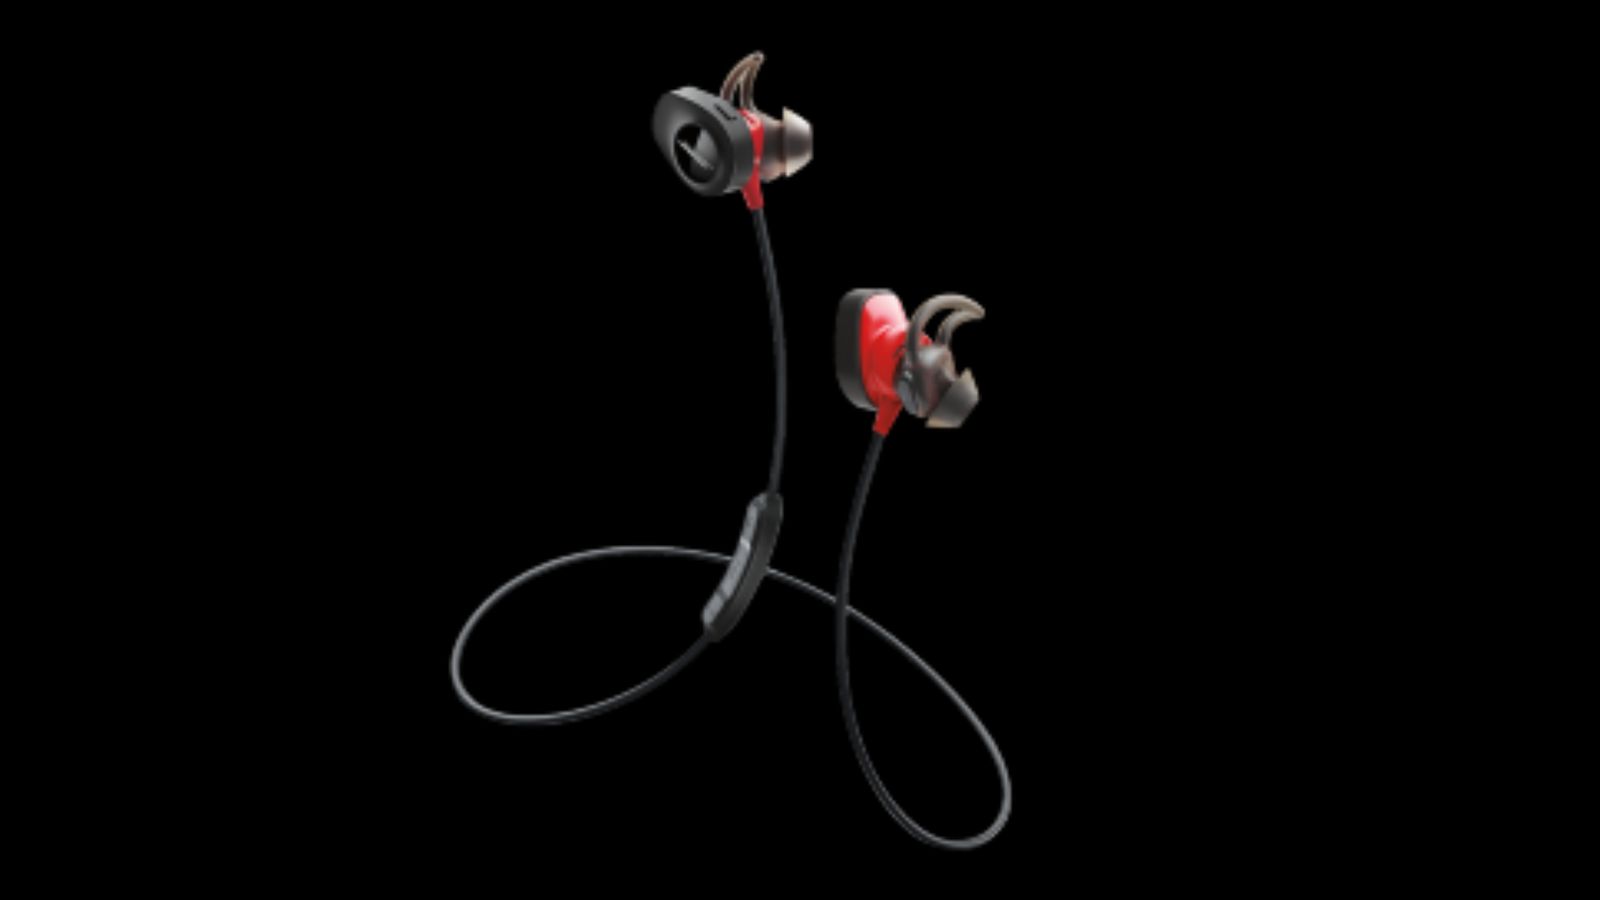 Bose SoundSport product image of a pair of black and red headphones with a cable to wrap around your neck